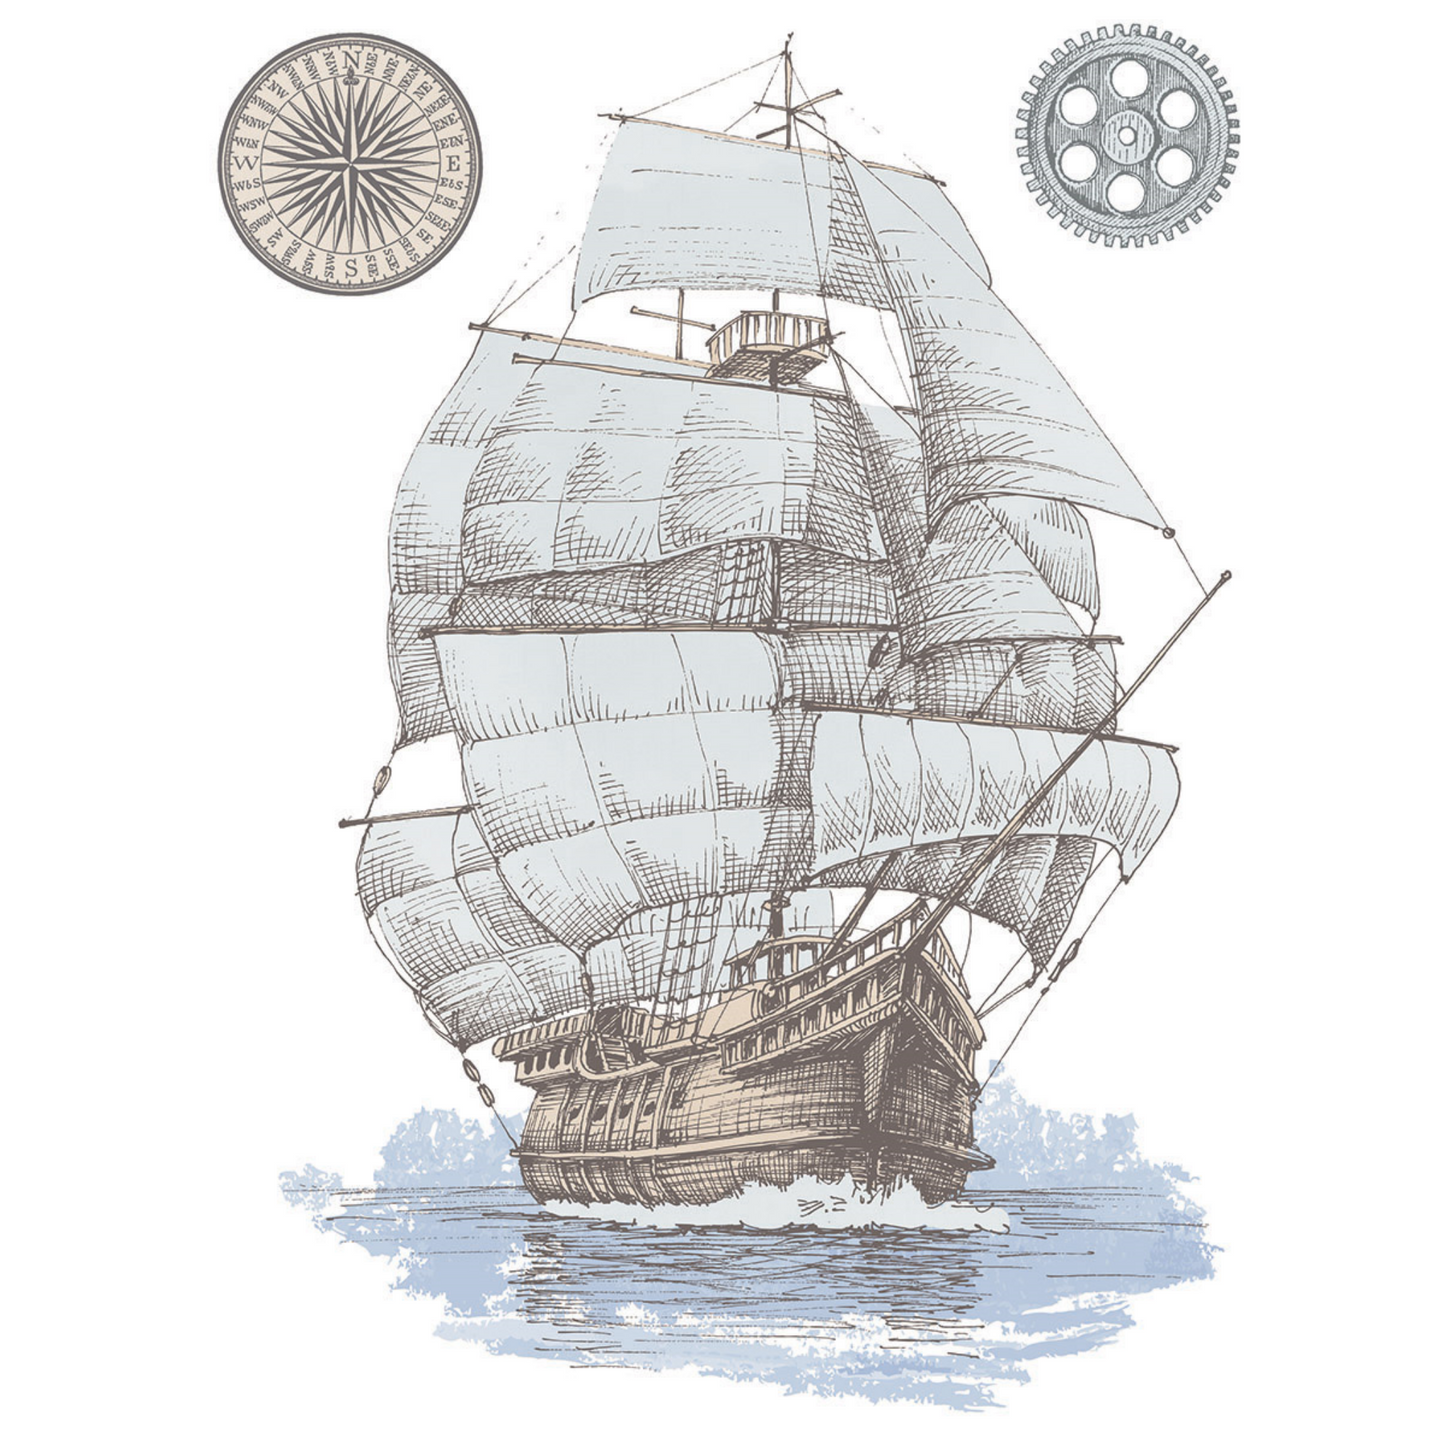 Exploration - IOD Transfer by Iron Orchid Designs page 4 of 8 sheets.  Features vintage image tranfers of 17 century boat, gears and compass at Milton's Daughter